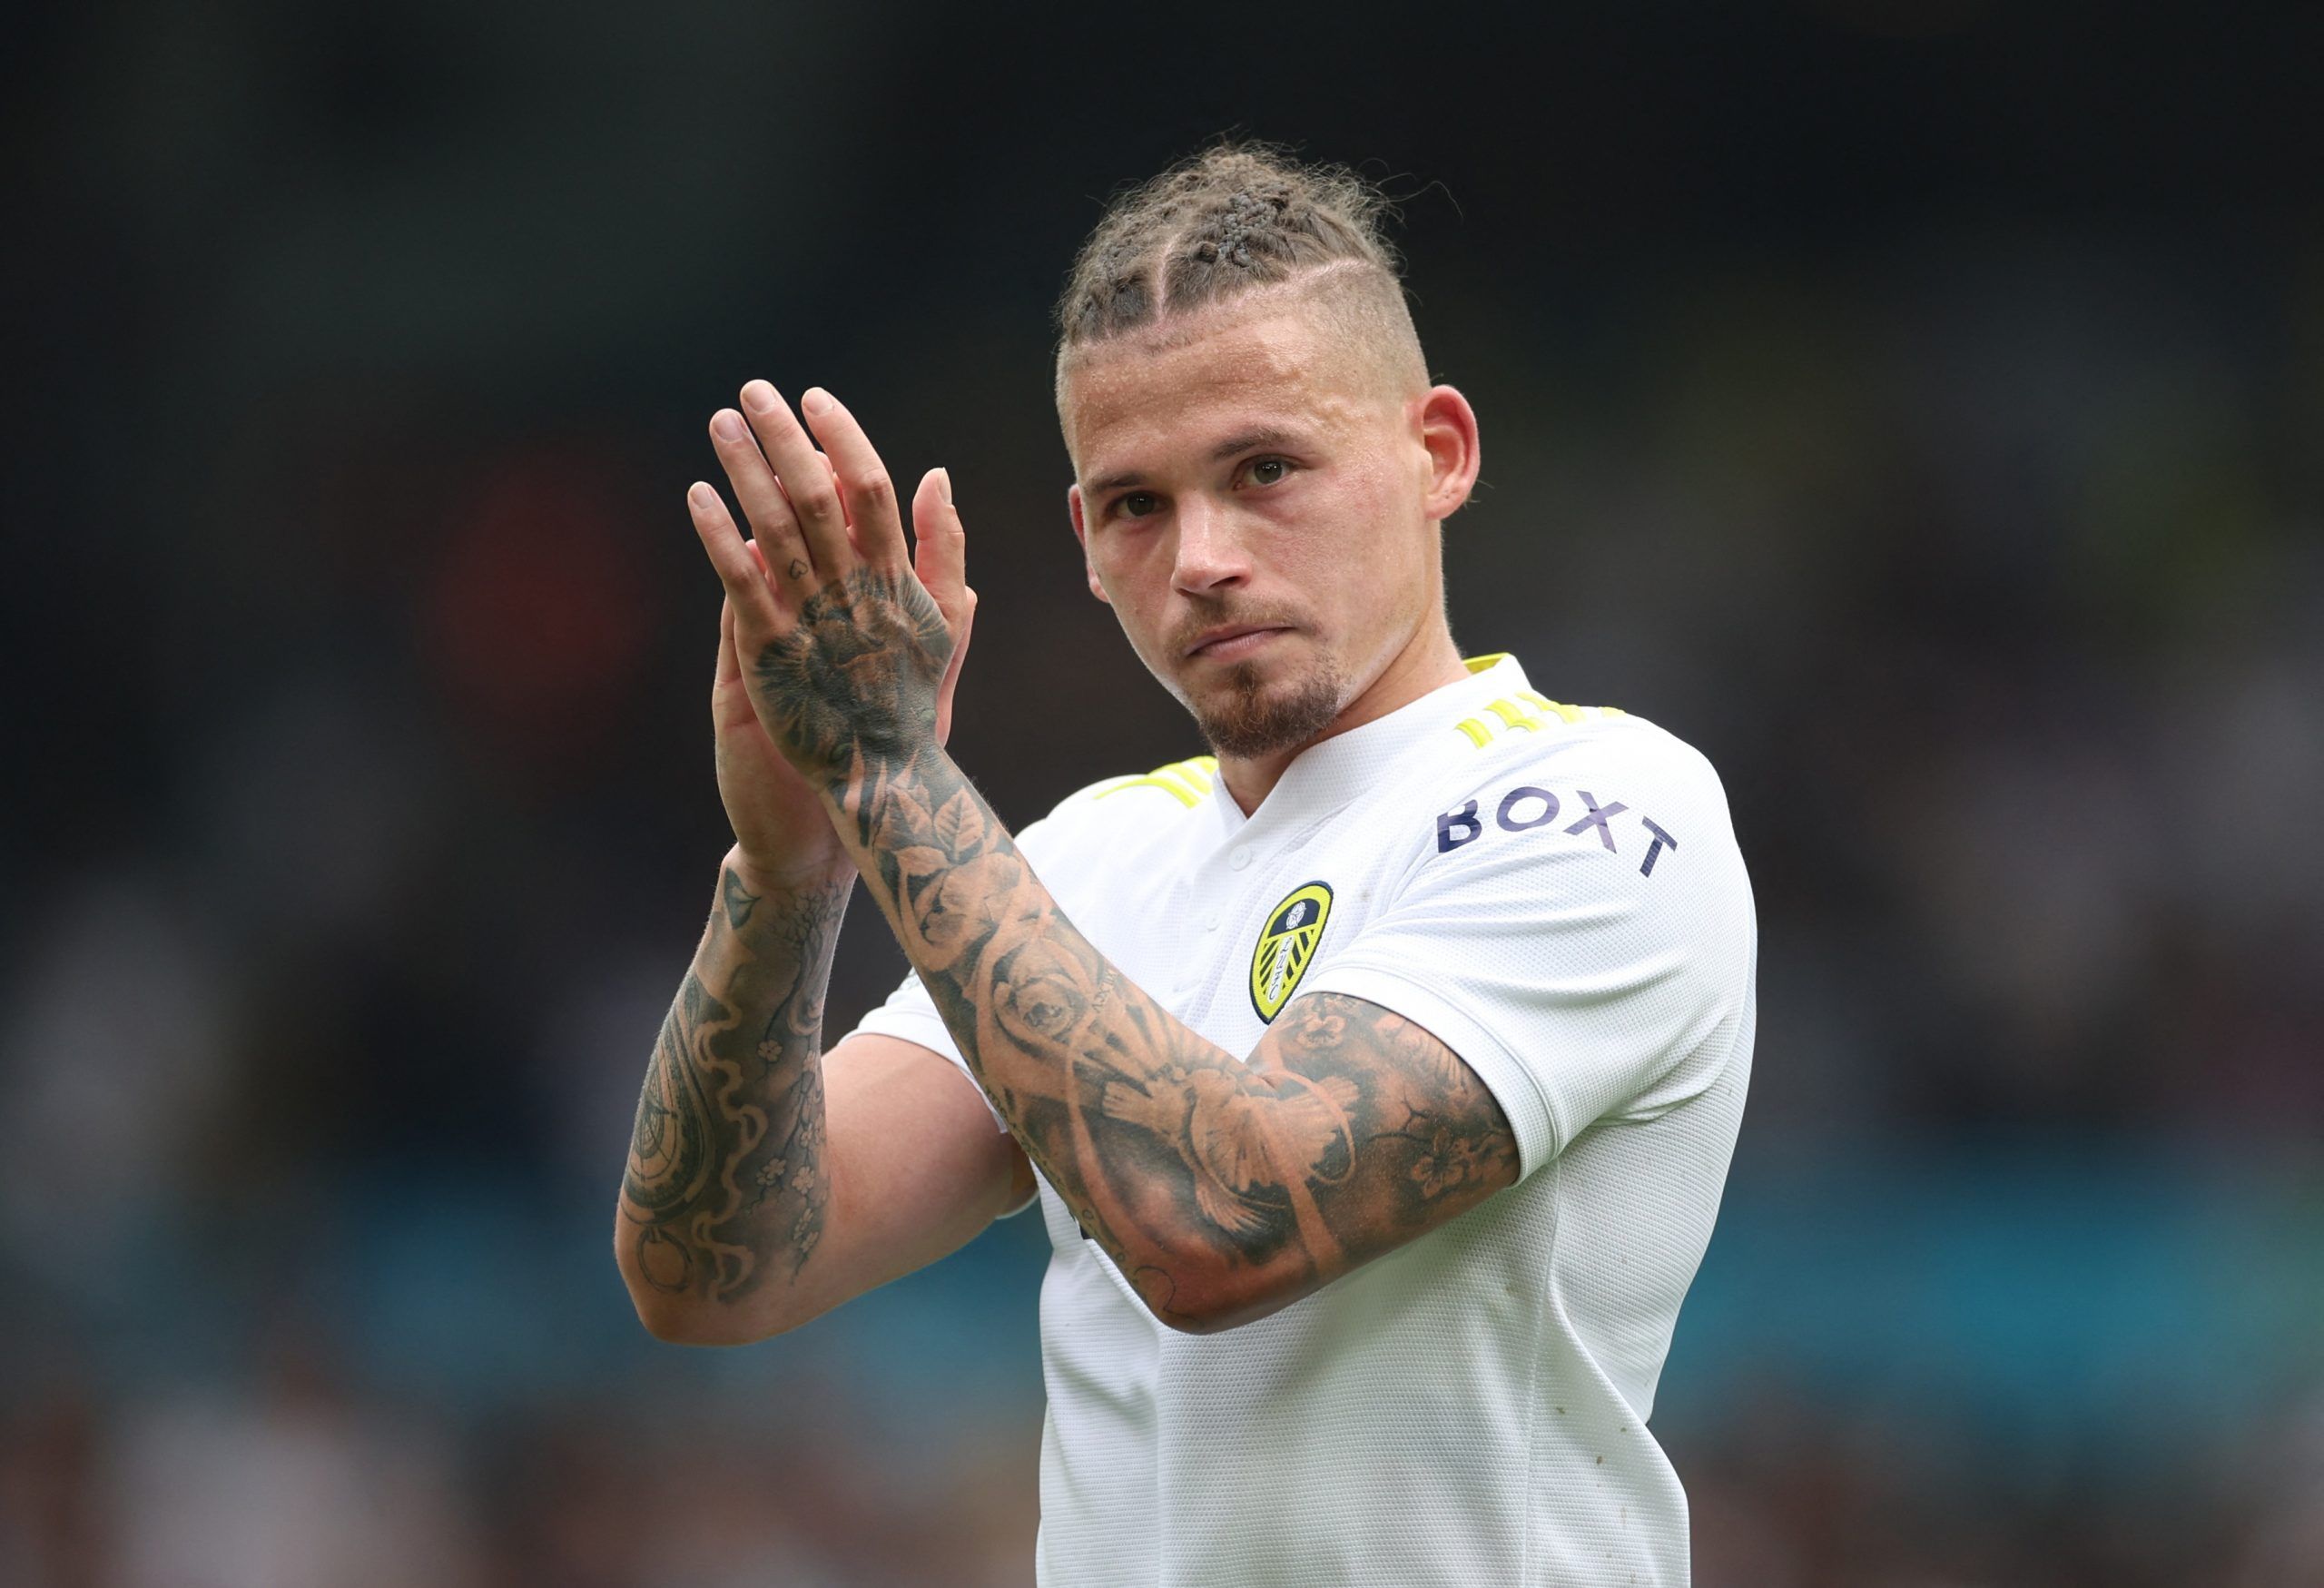 kalvin-phillips-leeds-united-premier-league-aston-villa-transfer-news-newcastle-united-transfer-news-steven-gerrard-kamara-scaled.jpg
 Soccer Football - Premier League - Leeds United v Brighton &amp; Hove Albion - Elland Road, Leeds, Britain - May 15, 2022 Leeds United's Kalvin Phillips applauds fans after the match Action Images via Reuters/Carl Recine EDITORIAL USE ONLY. No use with unauthorized audio, video, data, fixture lists, club/league logos or 'live' services. Online in-match use limite